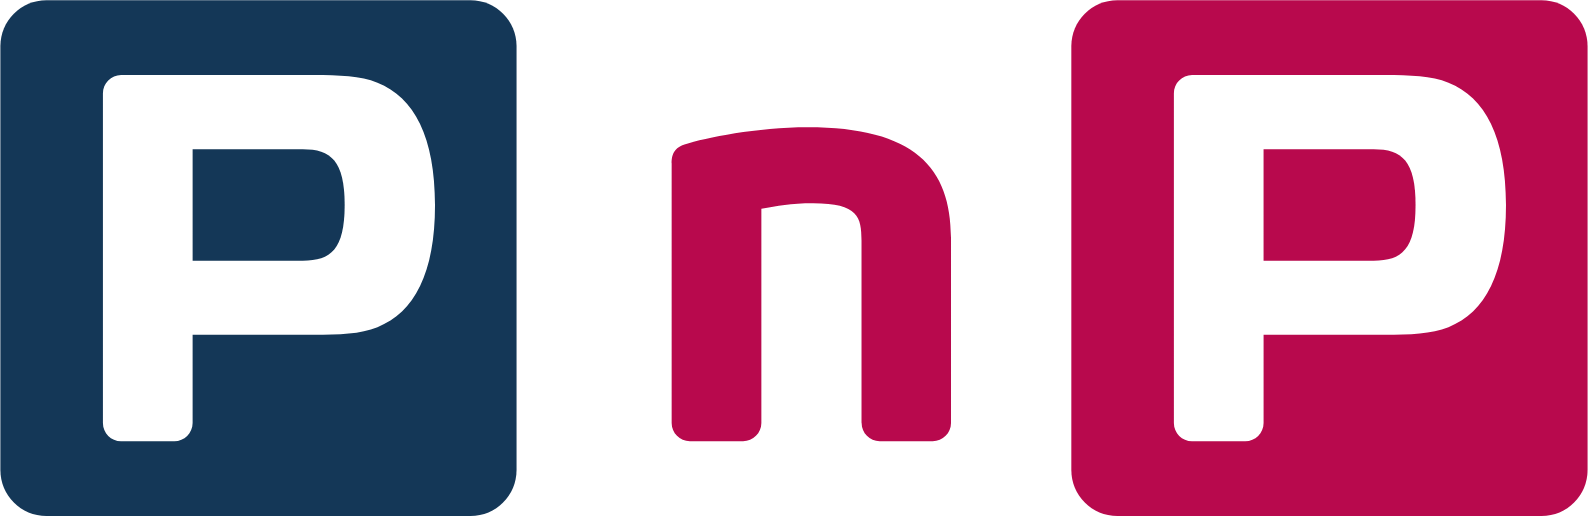 Pick n Pay Stores logo (PNG transparent)